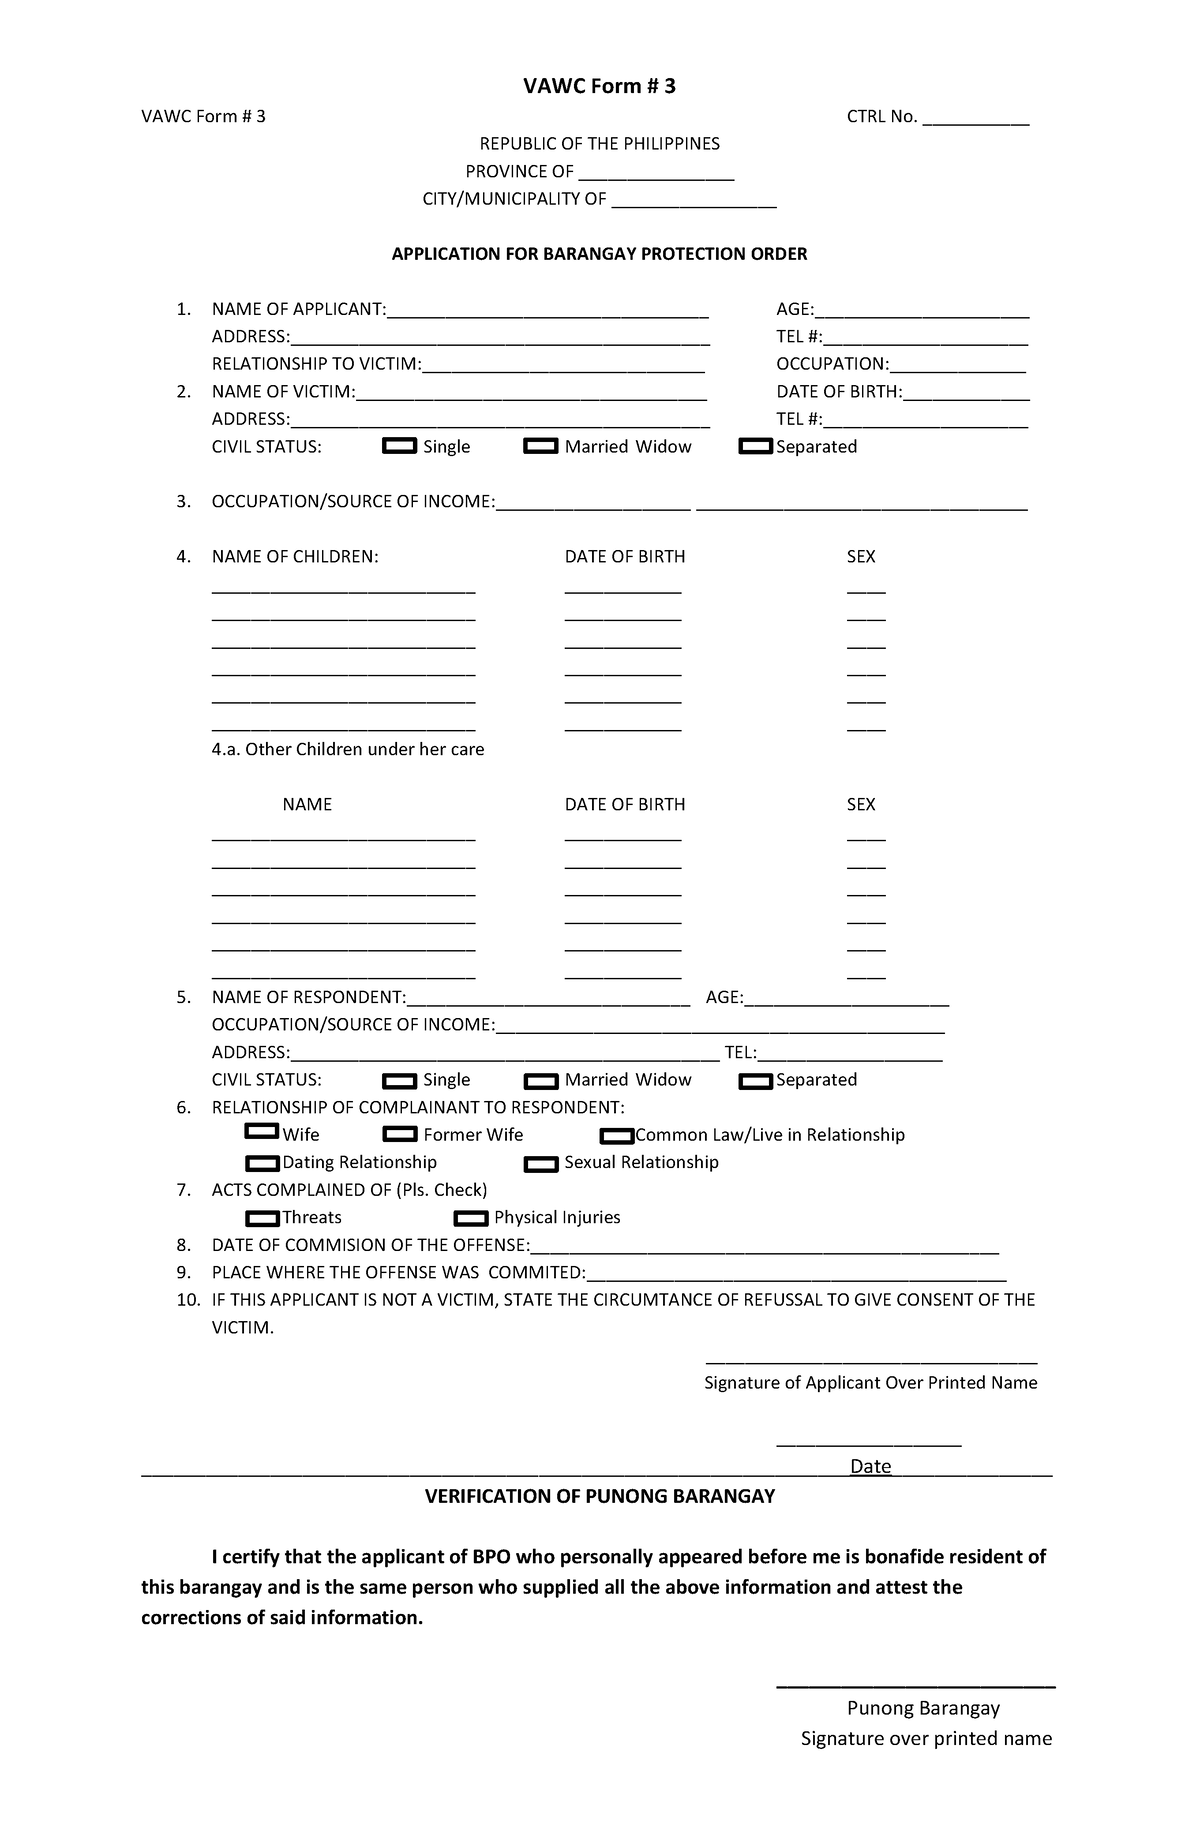 Vawc Forms Republic Of The Philippines Province Of City 8302